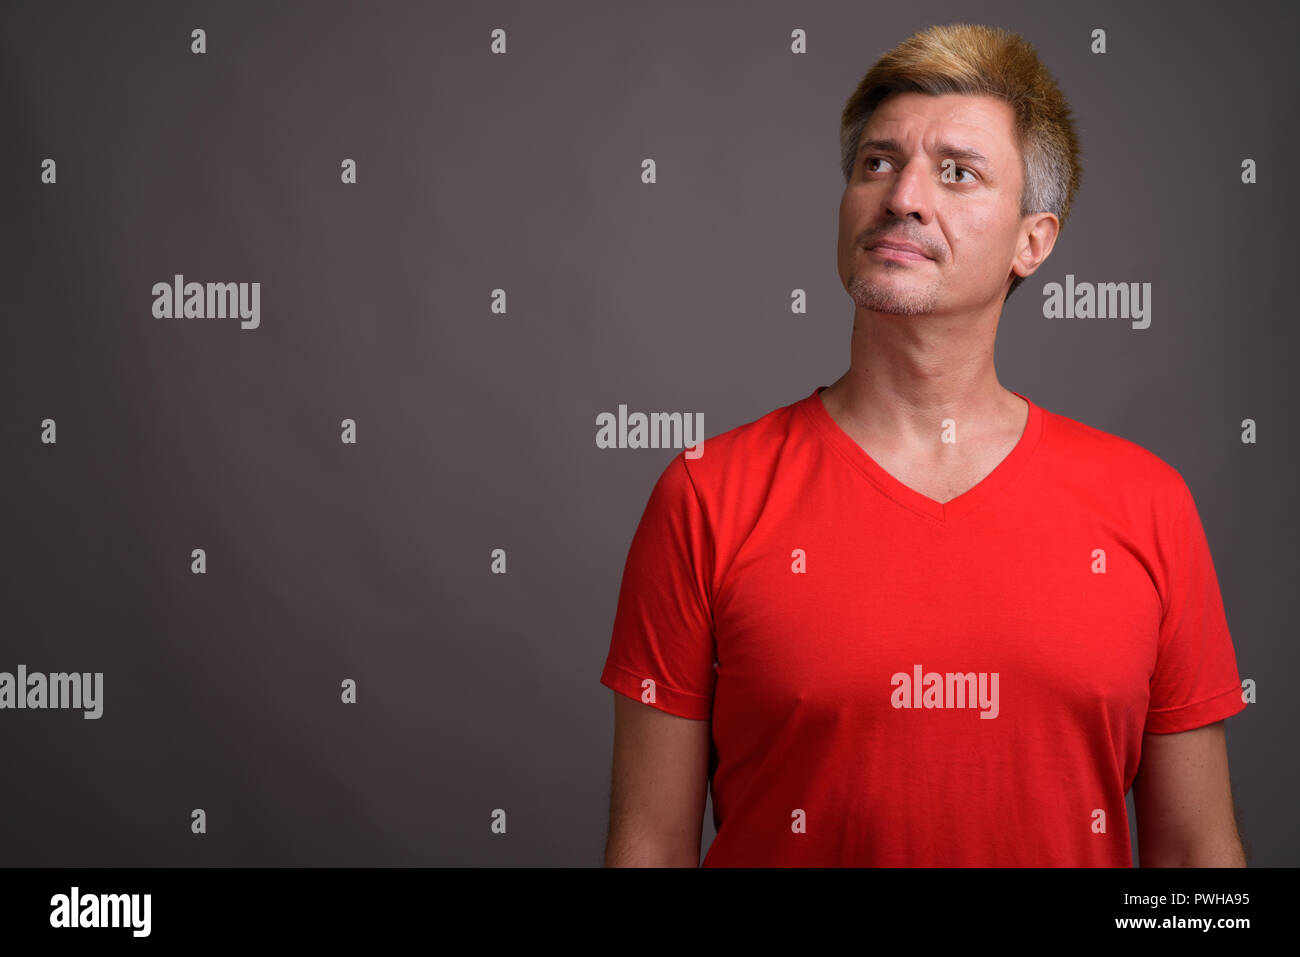 Man with blond hair wearing red shirt against gray background Stock Photo